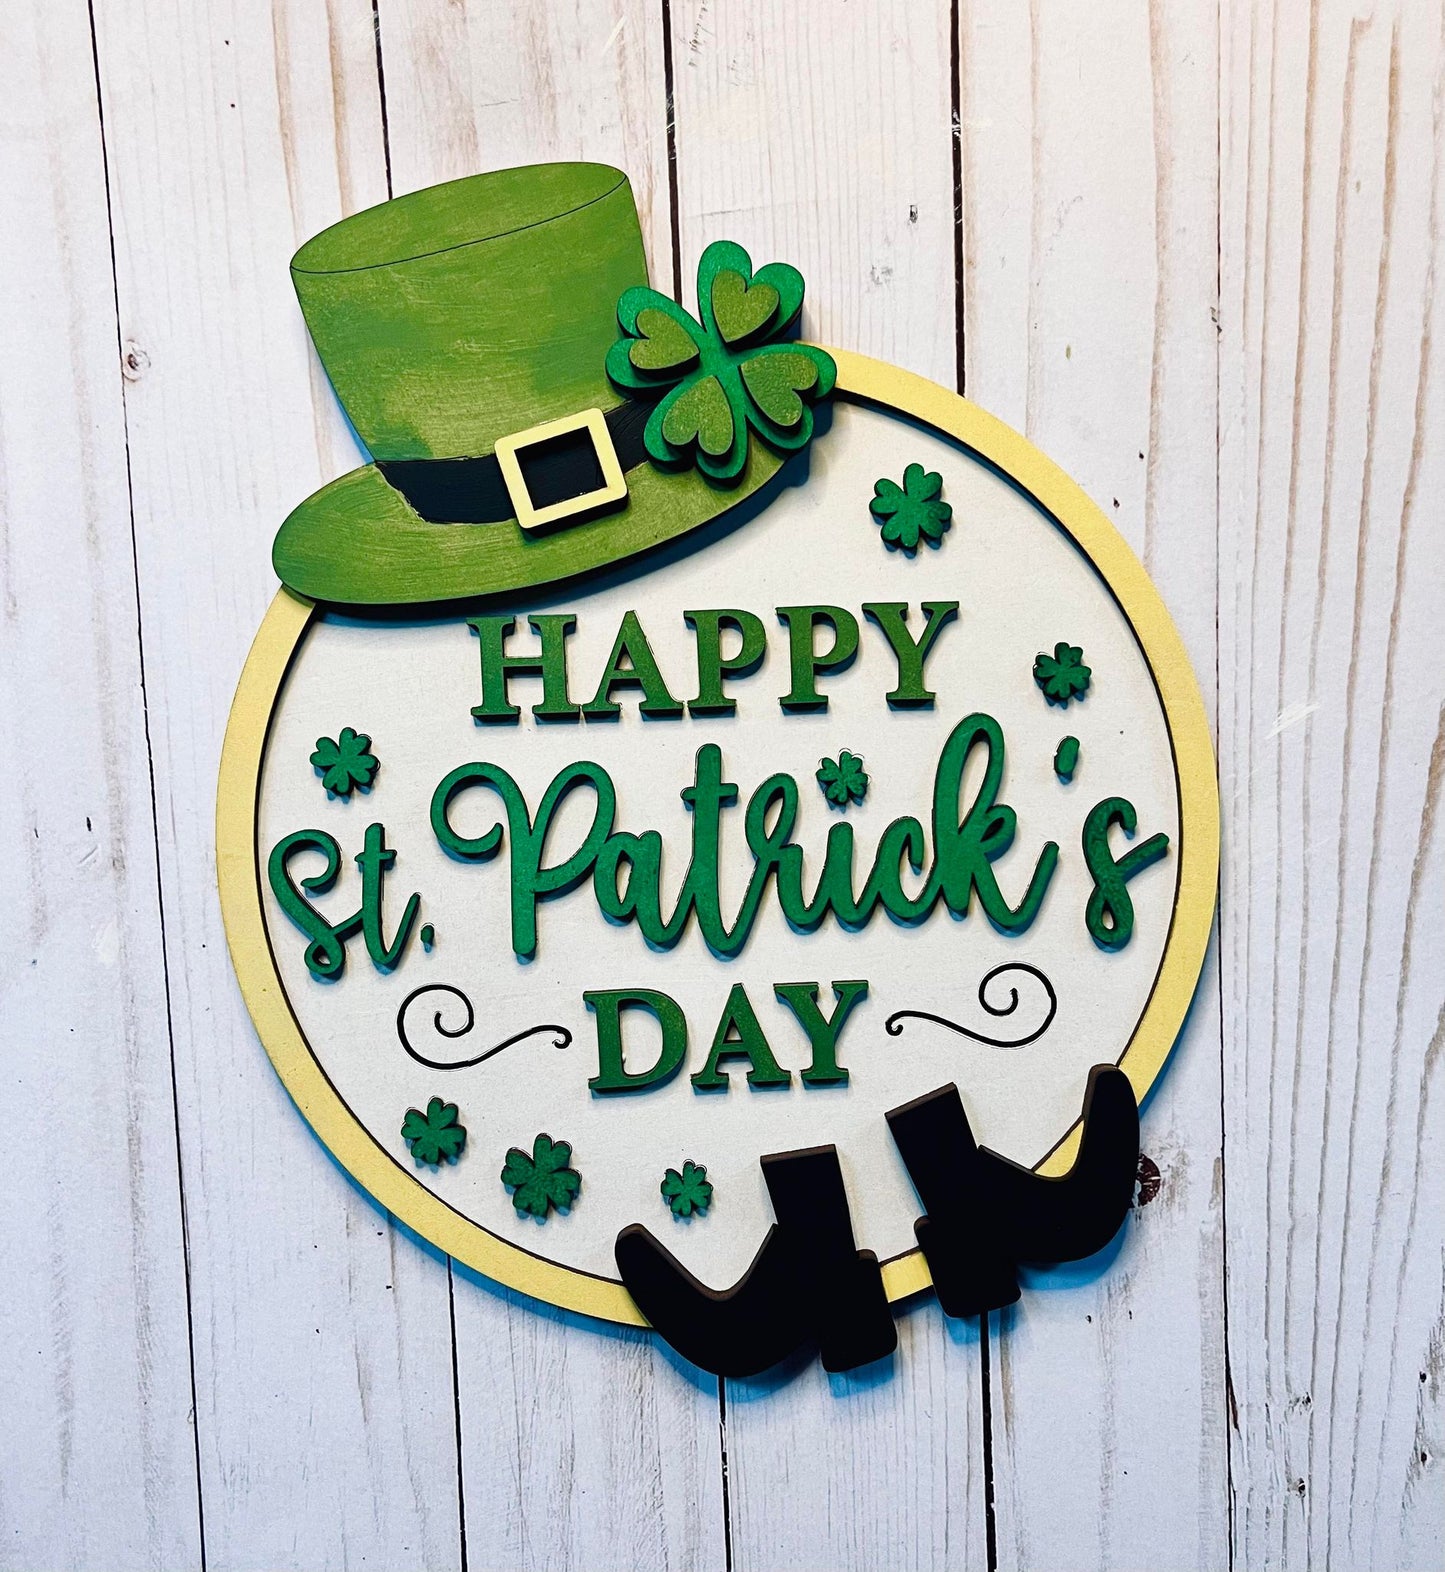 Happy St. Patrick's Day Sign Kit - Ready to Paint